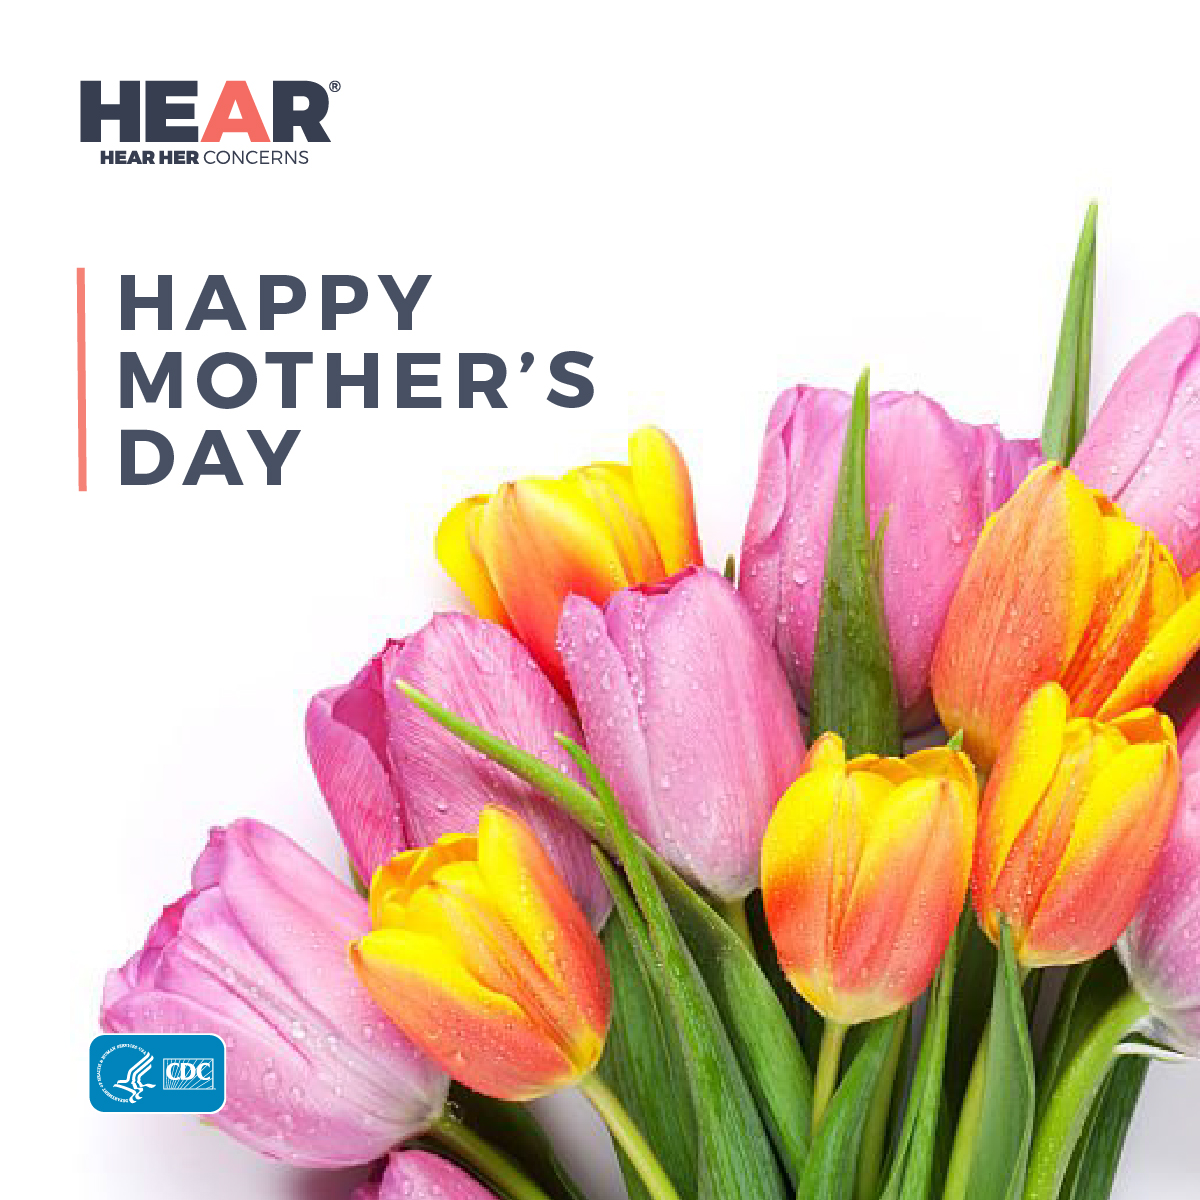 Today we celebrate all those called “mom.” Thank you for all that you do! 💐